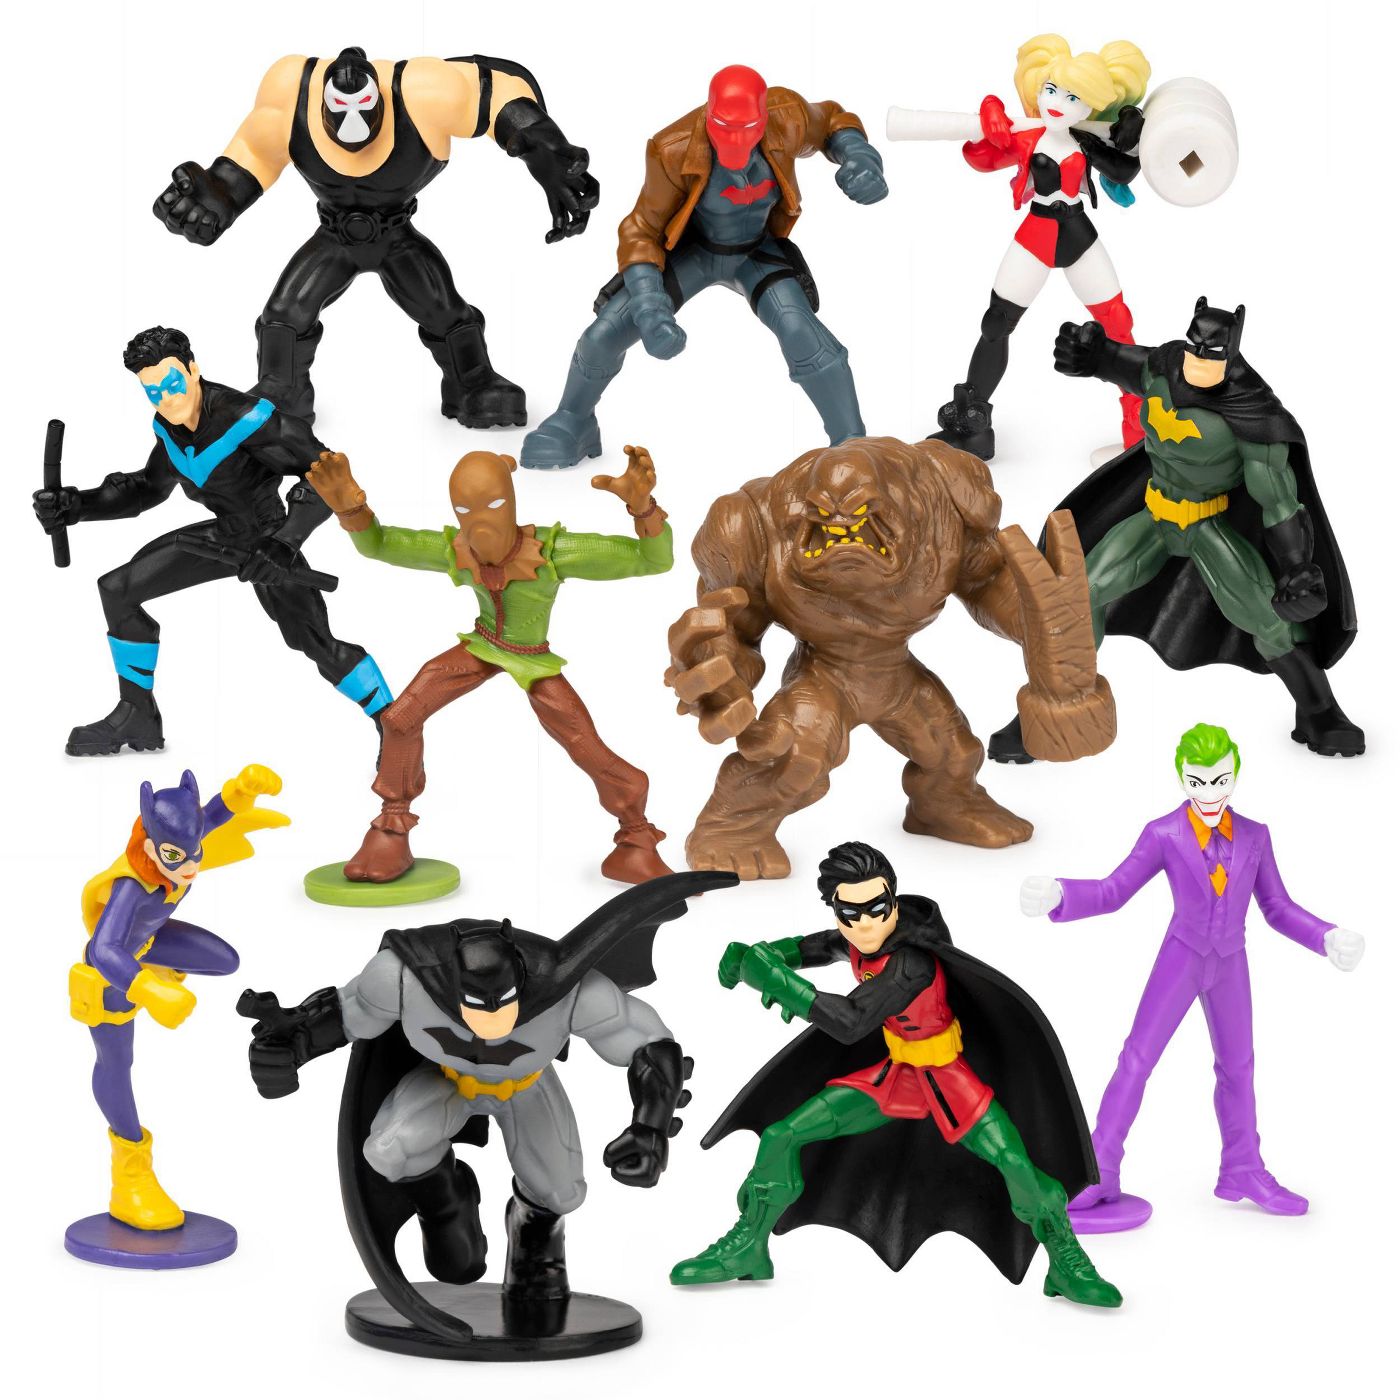 Batman 2" Collectible Blind Box Mini Figure (Characters and Styles May Vary)